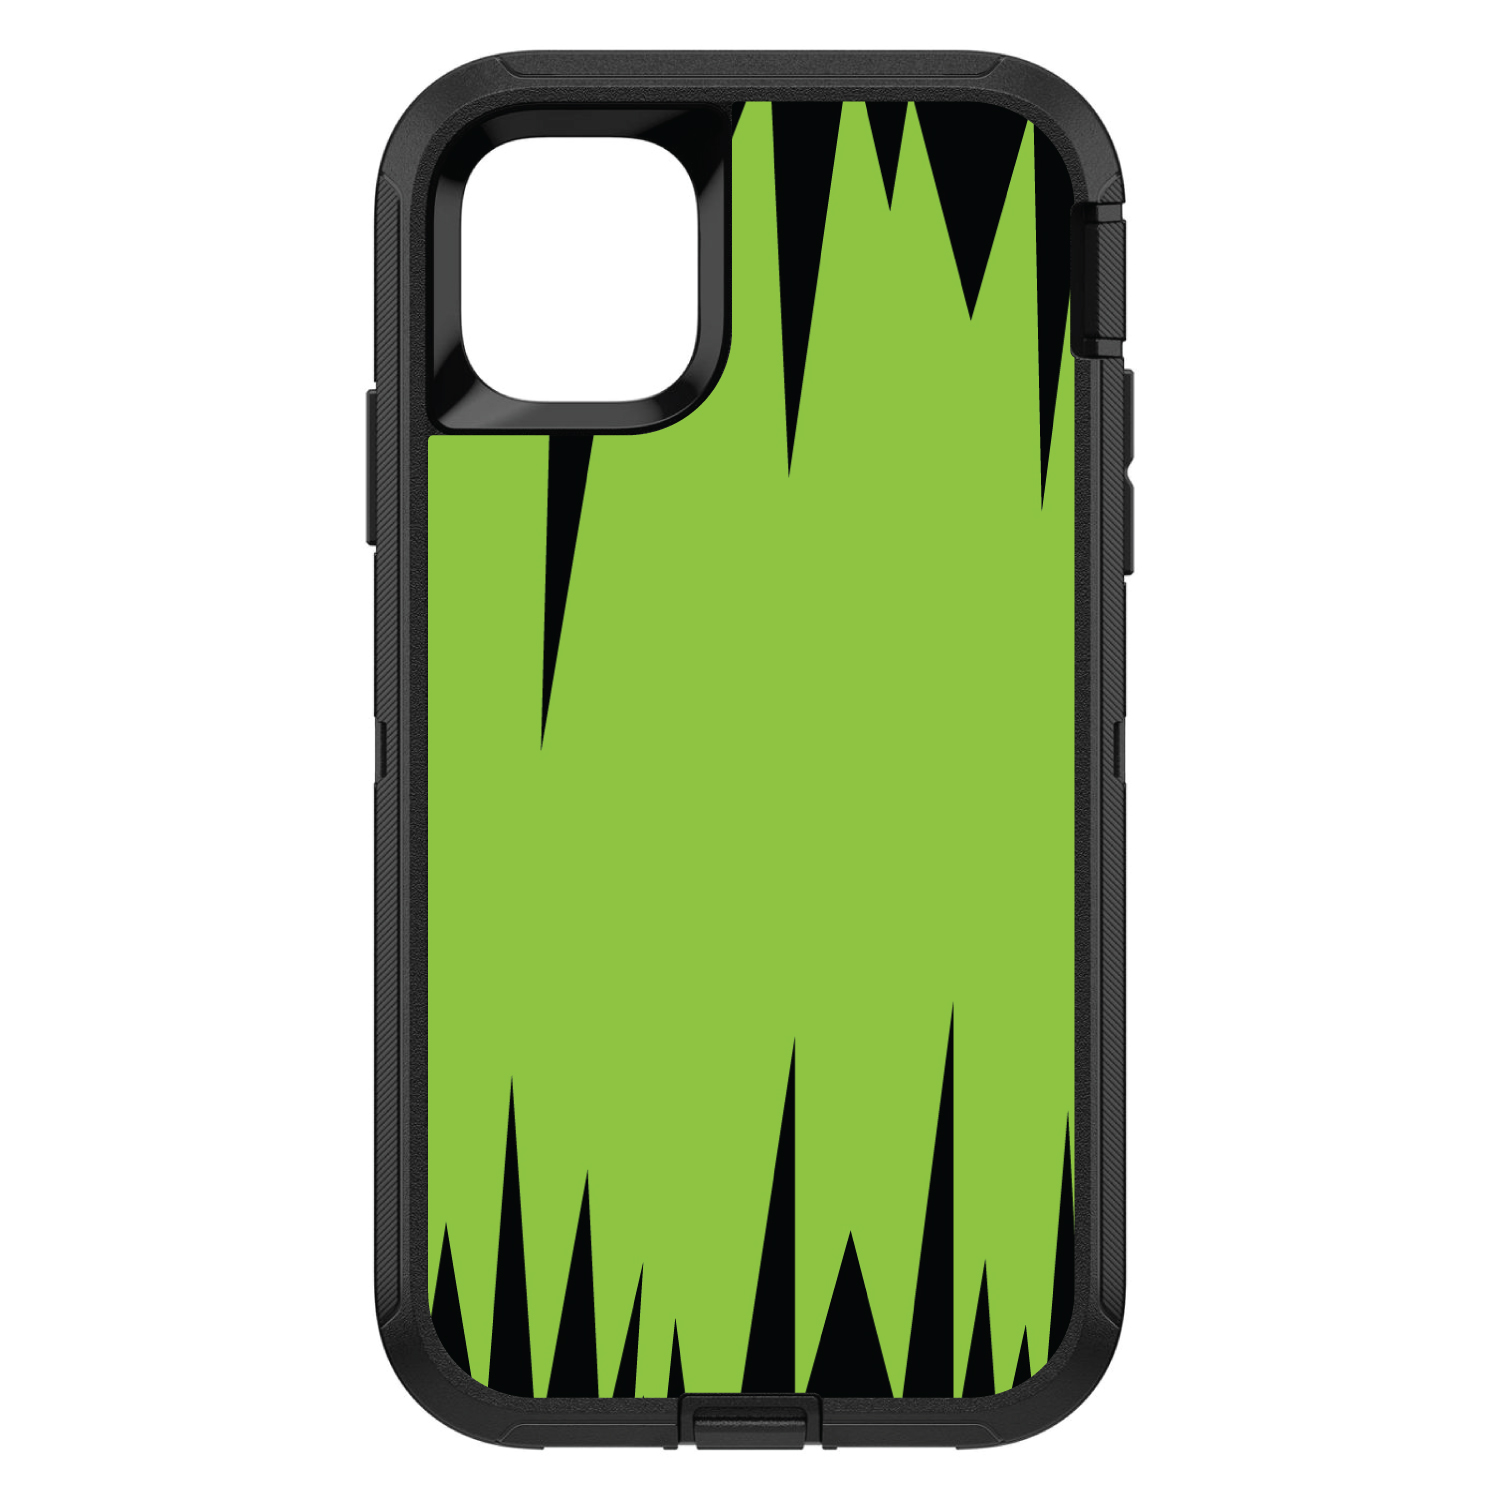 Distinctink Custom Skin Decal Compatible With Otterbox Defender For Iphone 11 Pro Max 6 5 Screen Lime Green Black Spikes Walmart Com Walmart Com